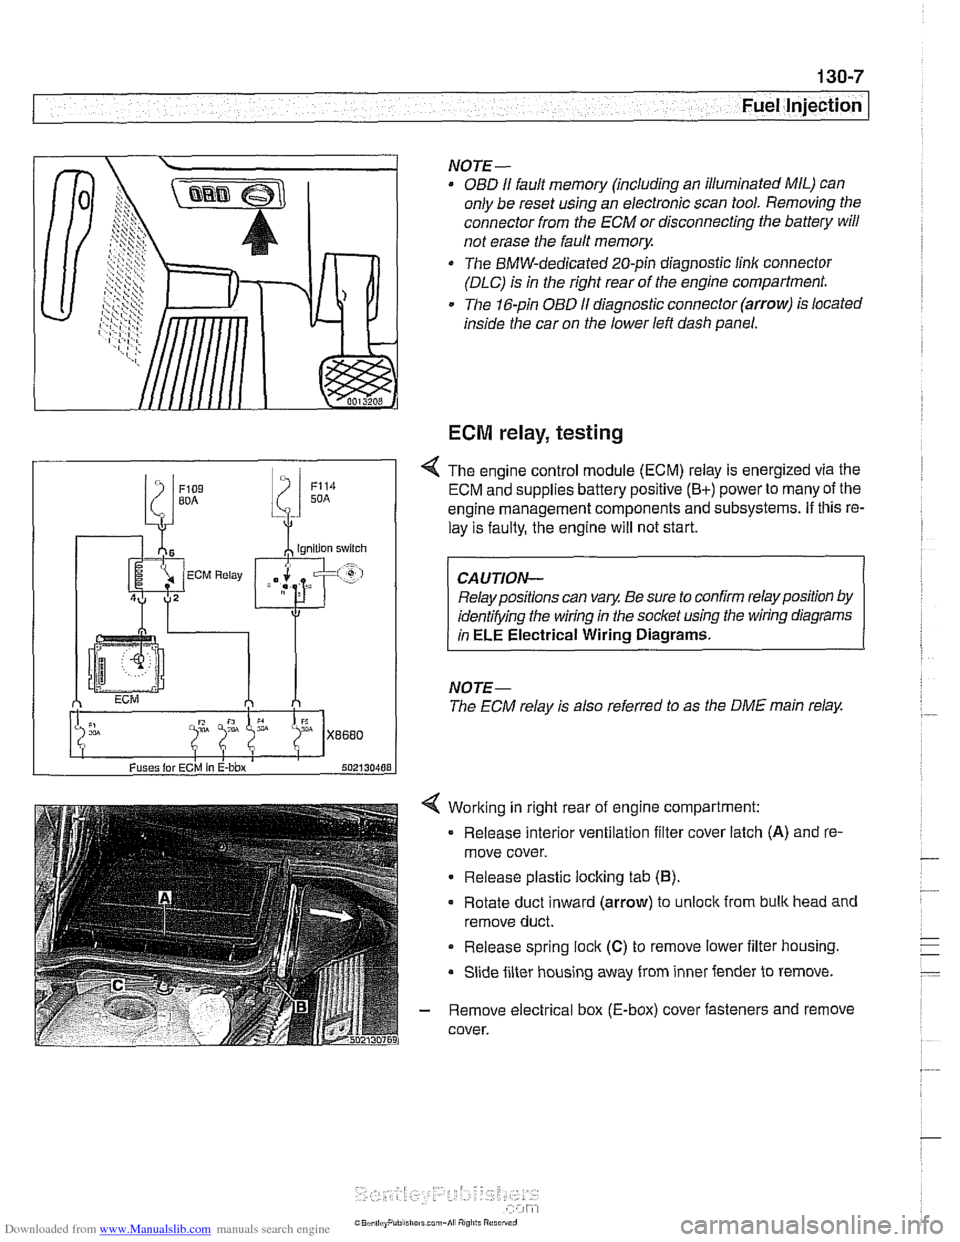 BMW 530i 1997 E39 Workshop Manual Downloaded from www.Manualslib.com manuals search engine 
Fuel Injection 1 
Working in right  rear of engine compartment: 
Release interior  ventilation filter cover  latch 
(A) and re- 
move cover. 
